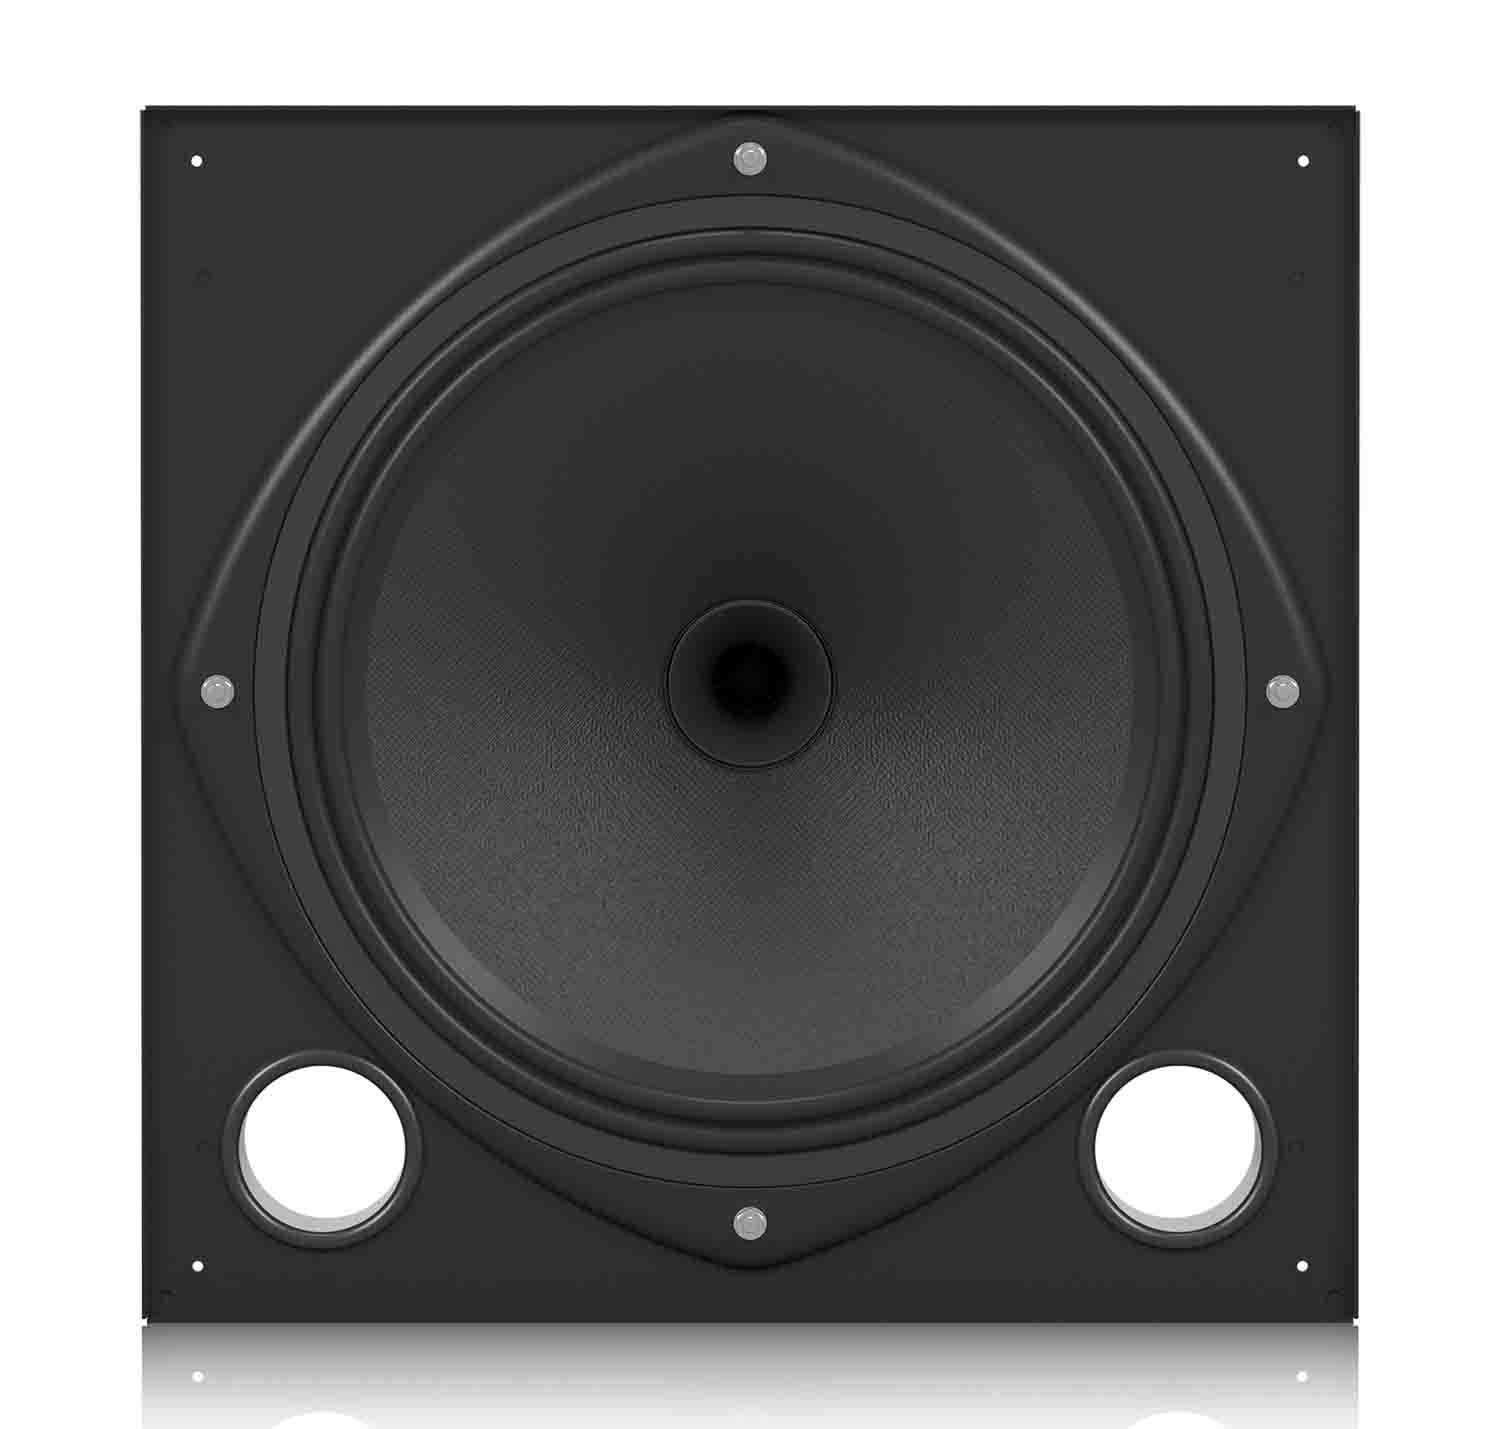 Tannoy CMS 1201DC 12-Inch Full Range Ceiling Loudspeaker with Dual Concentric Driver - Black - Hollywood DJ